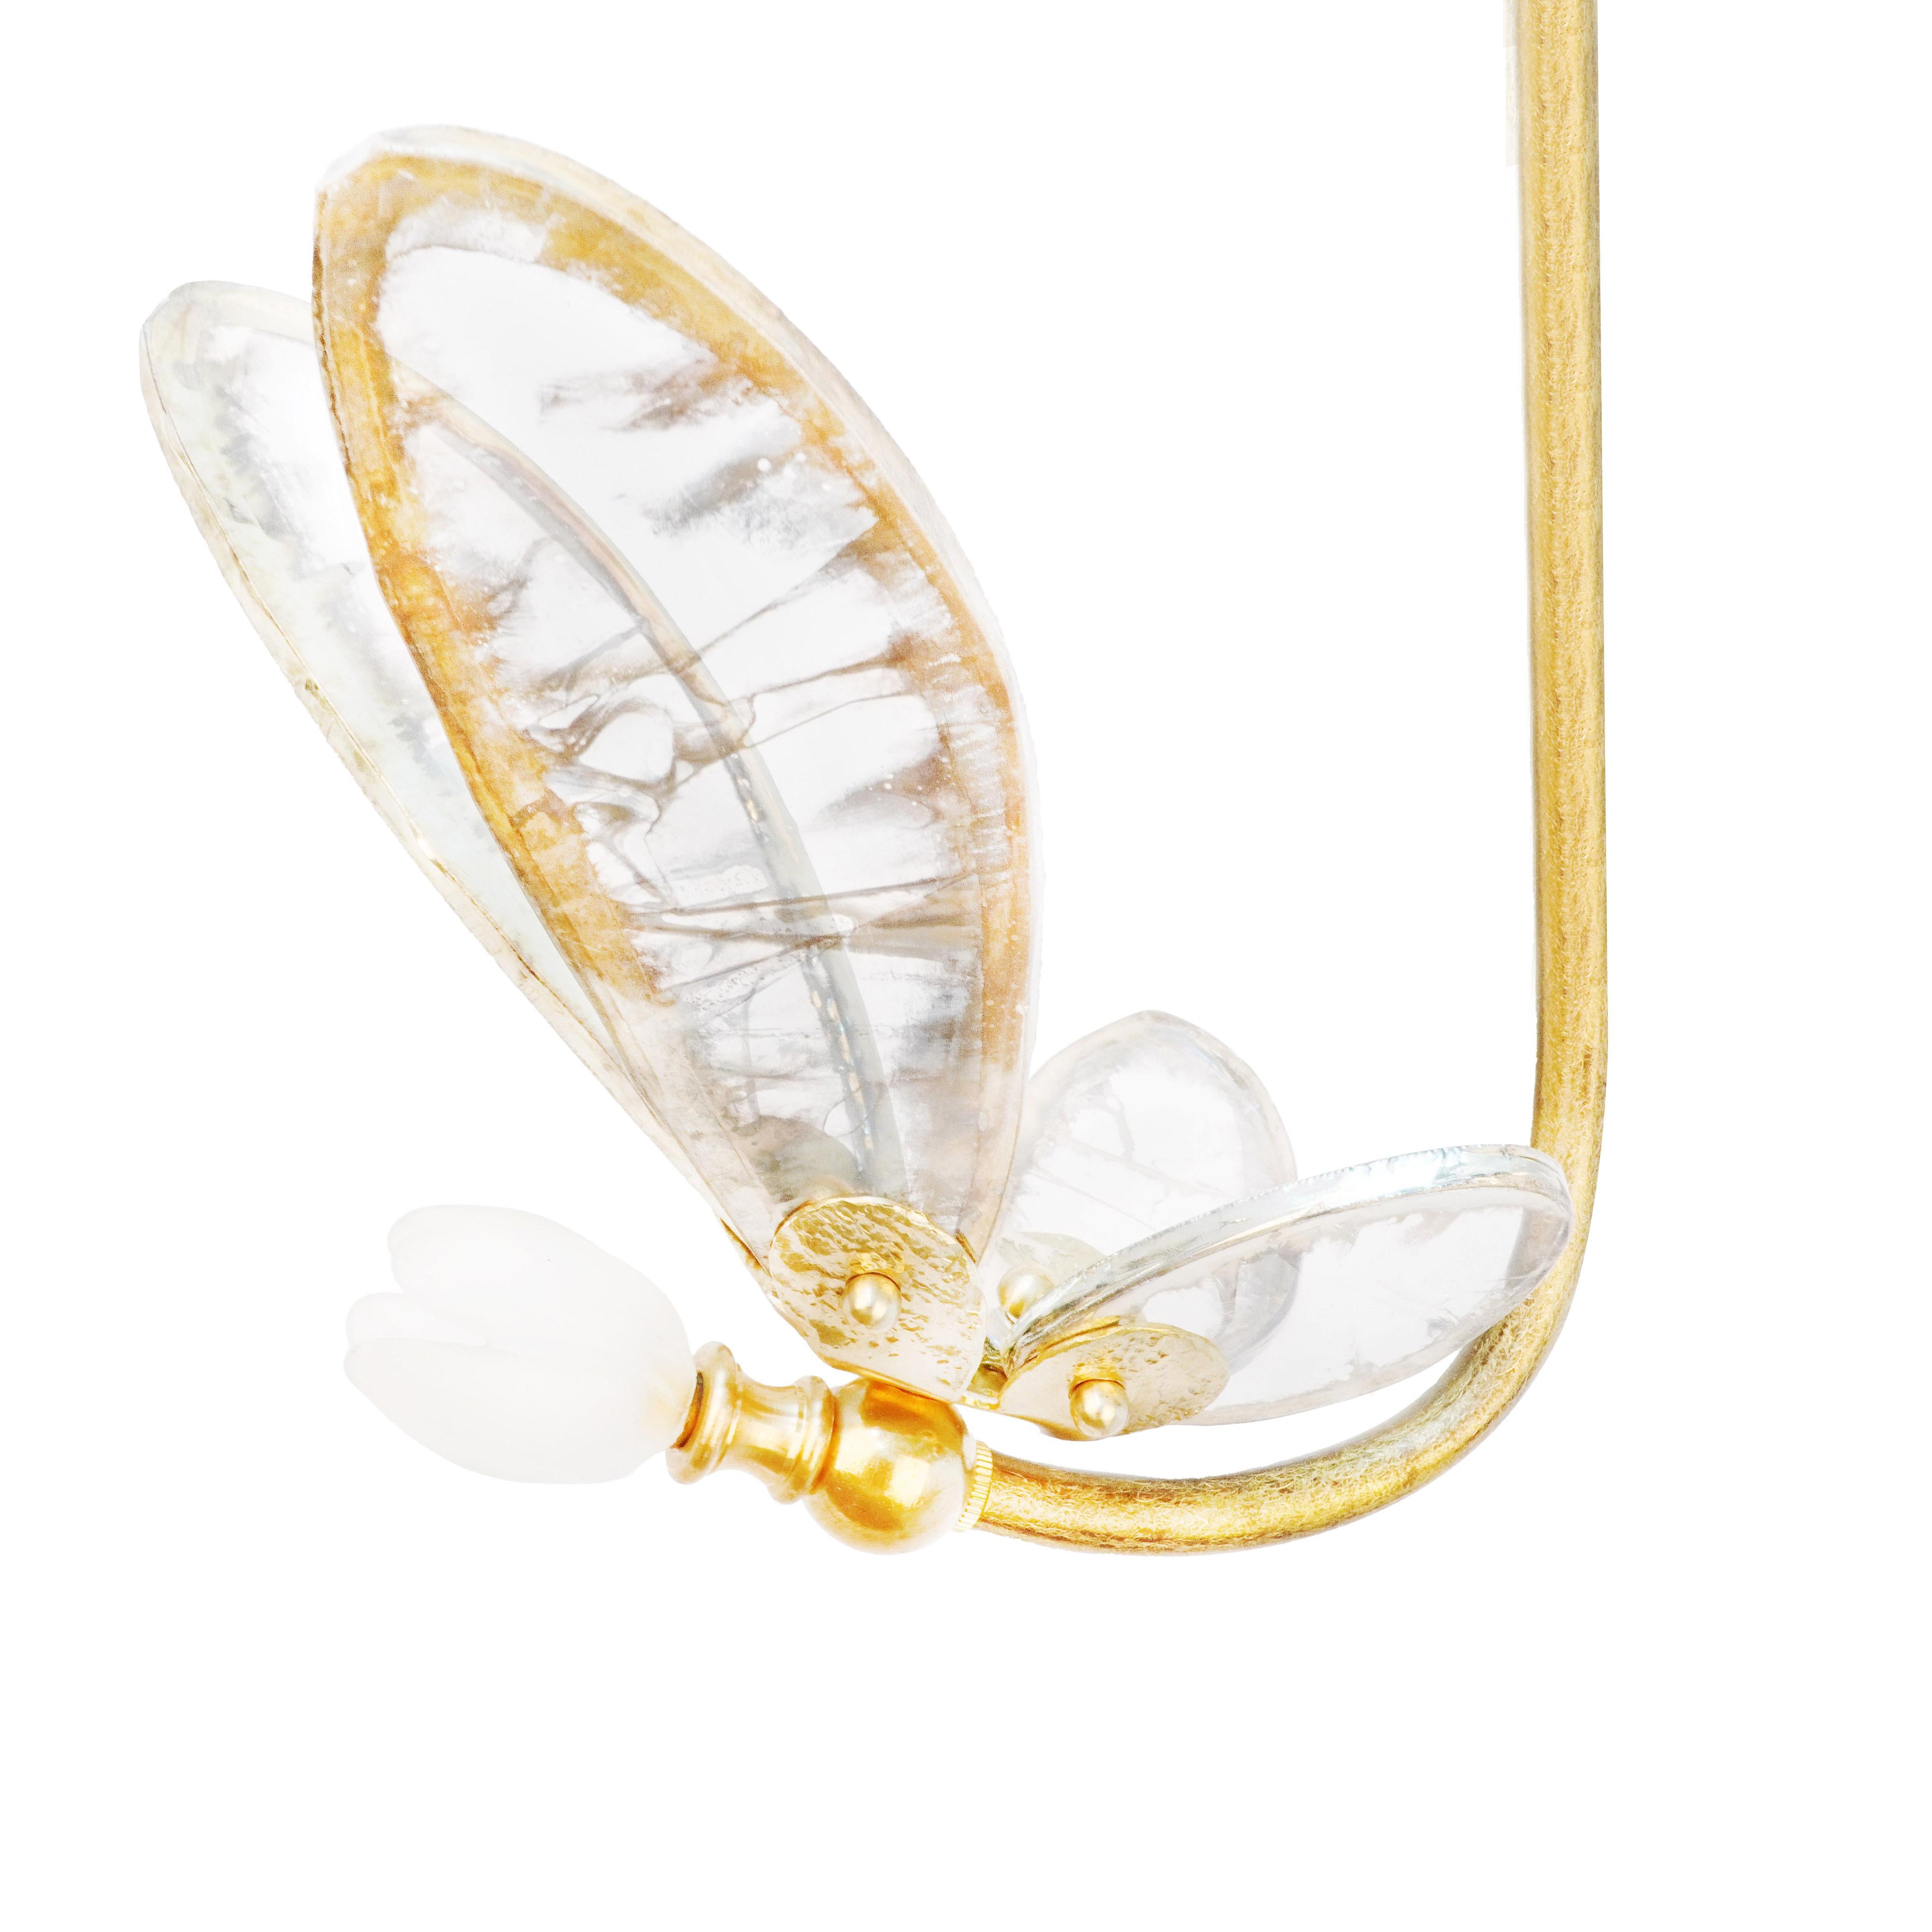 TRILLY the fairy wings of freedom   

Small and sophisticated, the Trillies, enterely crafted in Italy, are the little sisters of our Butterfly models, they bring an ethereal allure to your home décor, thanks to their colored and silvered glass